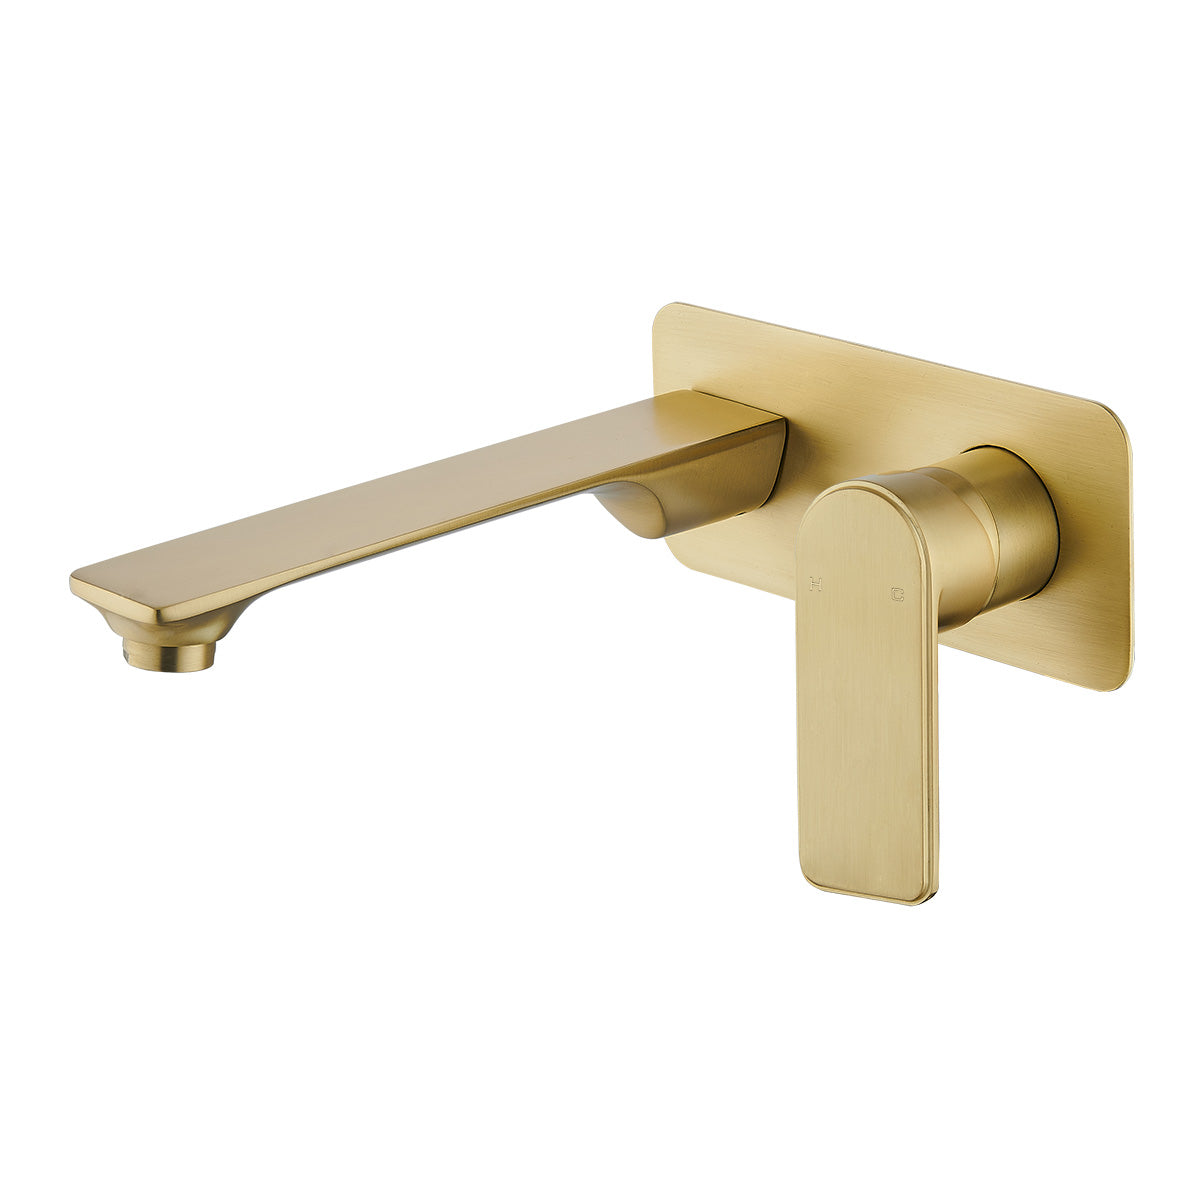 BTWS1 (BG) / Bateau Wall Mixer With Outlet (Brushed Gold)